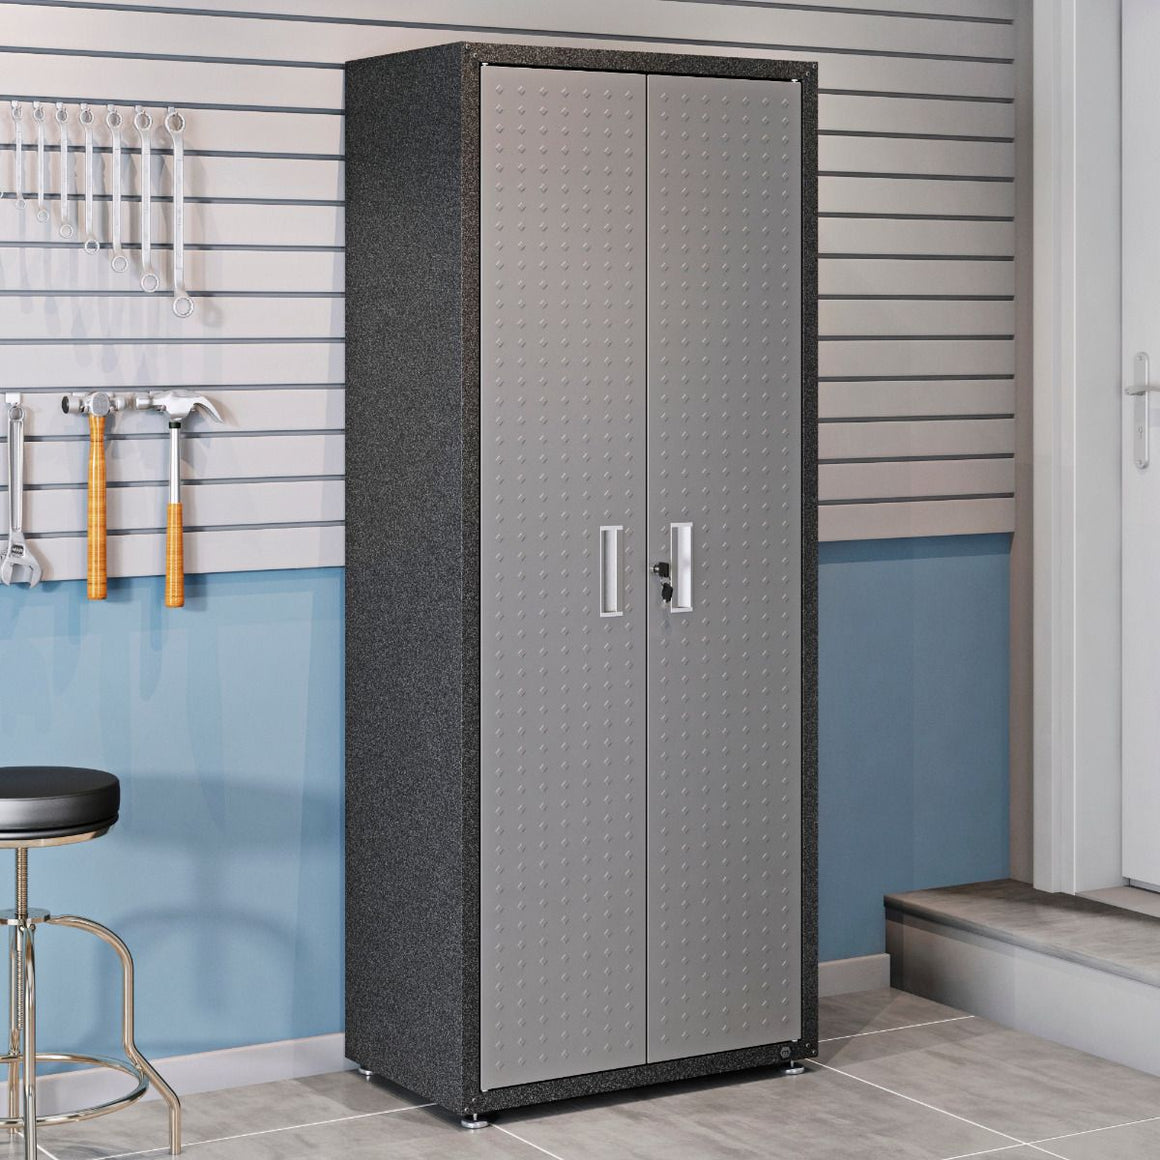 Fortress 74.8" Tall Garage Cabinet